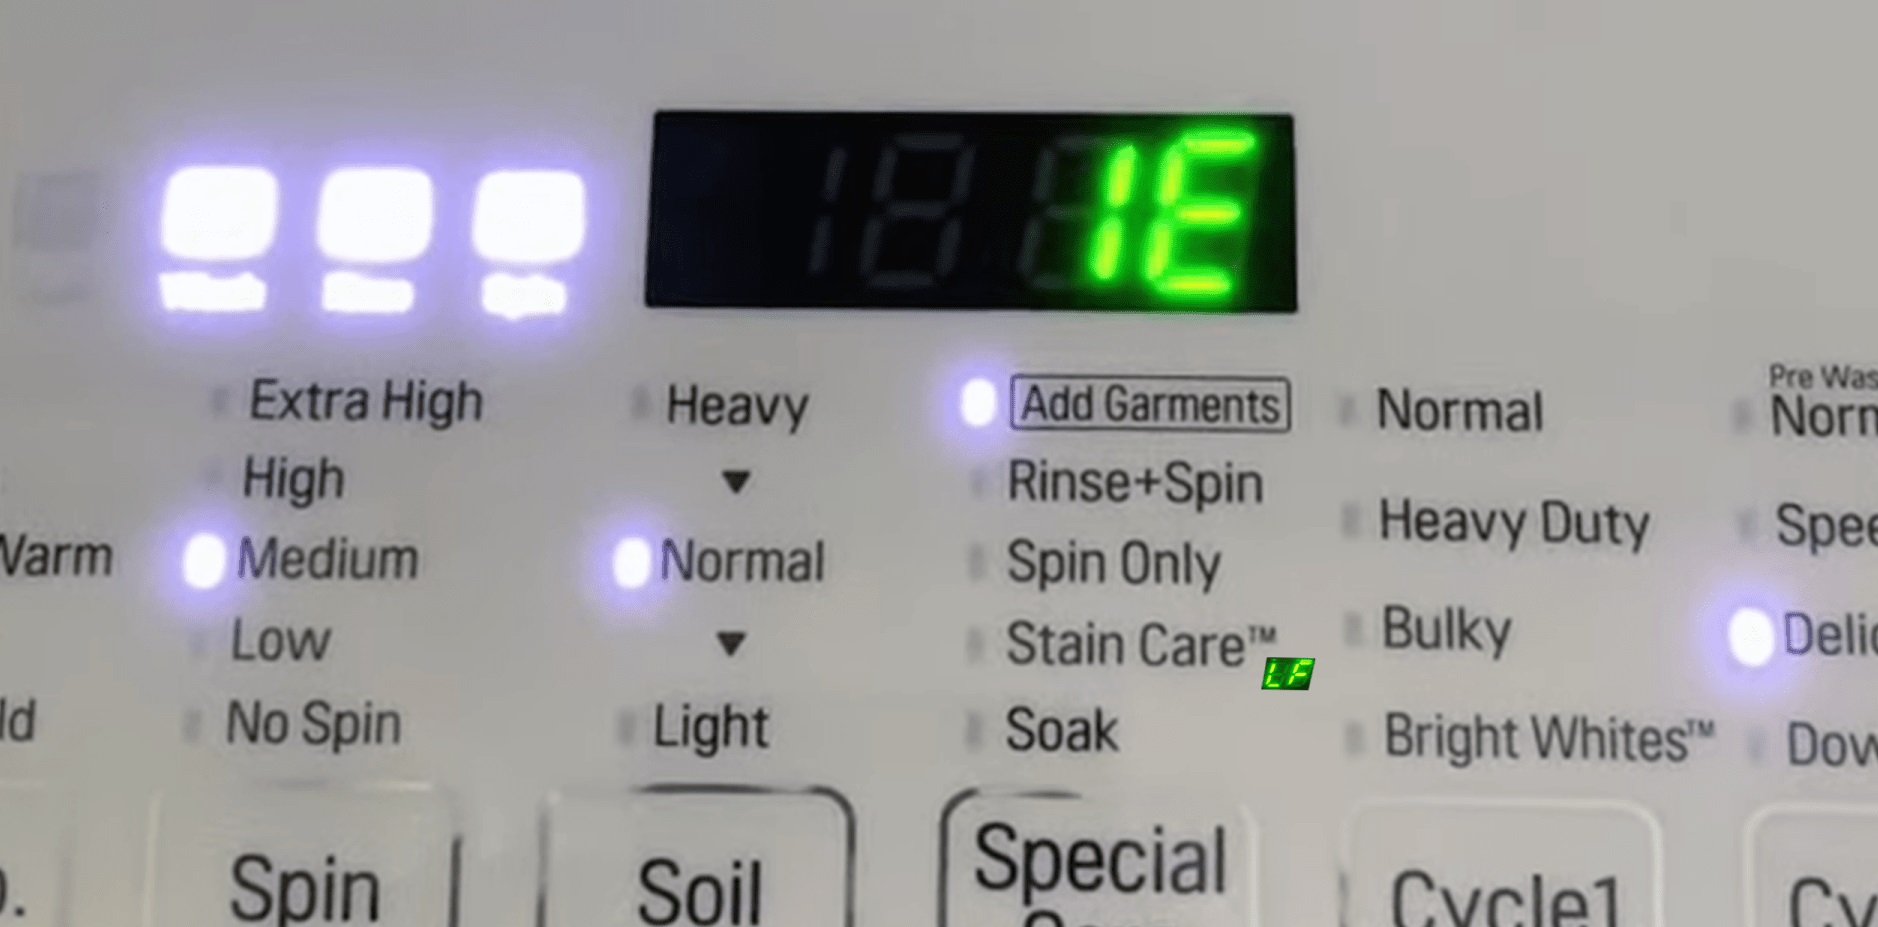 What Does Ie Mean On Washing Machine